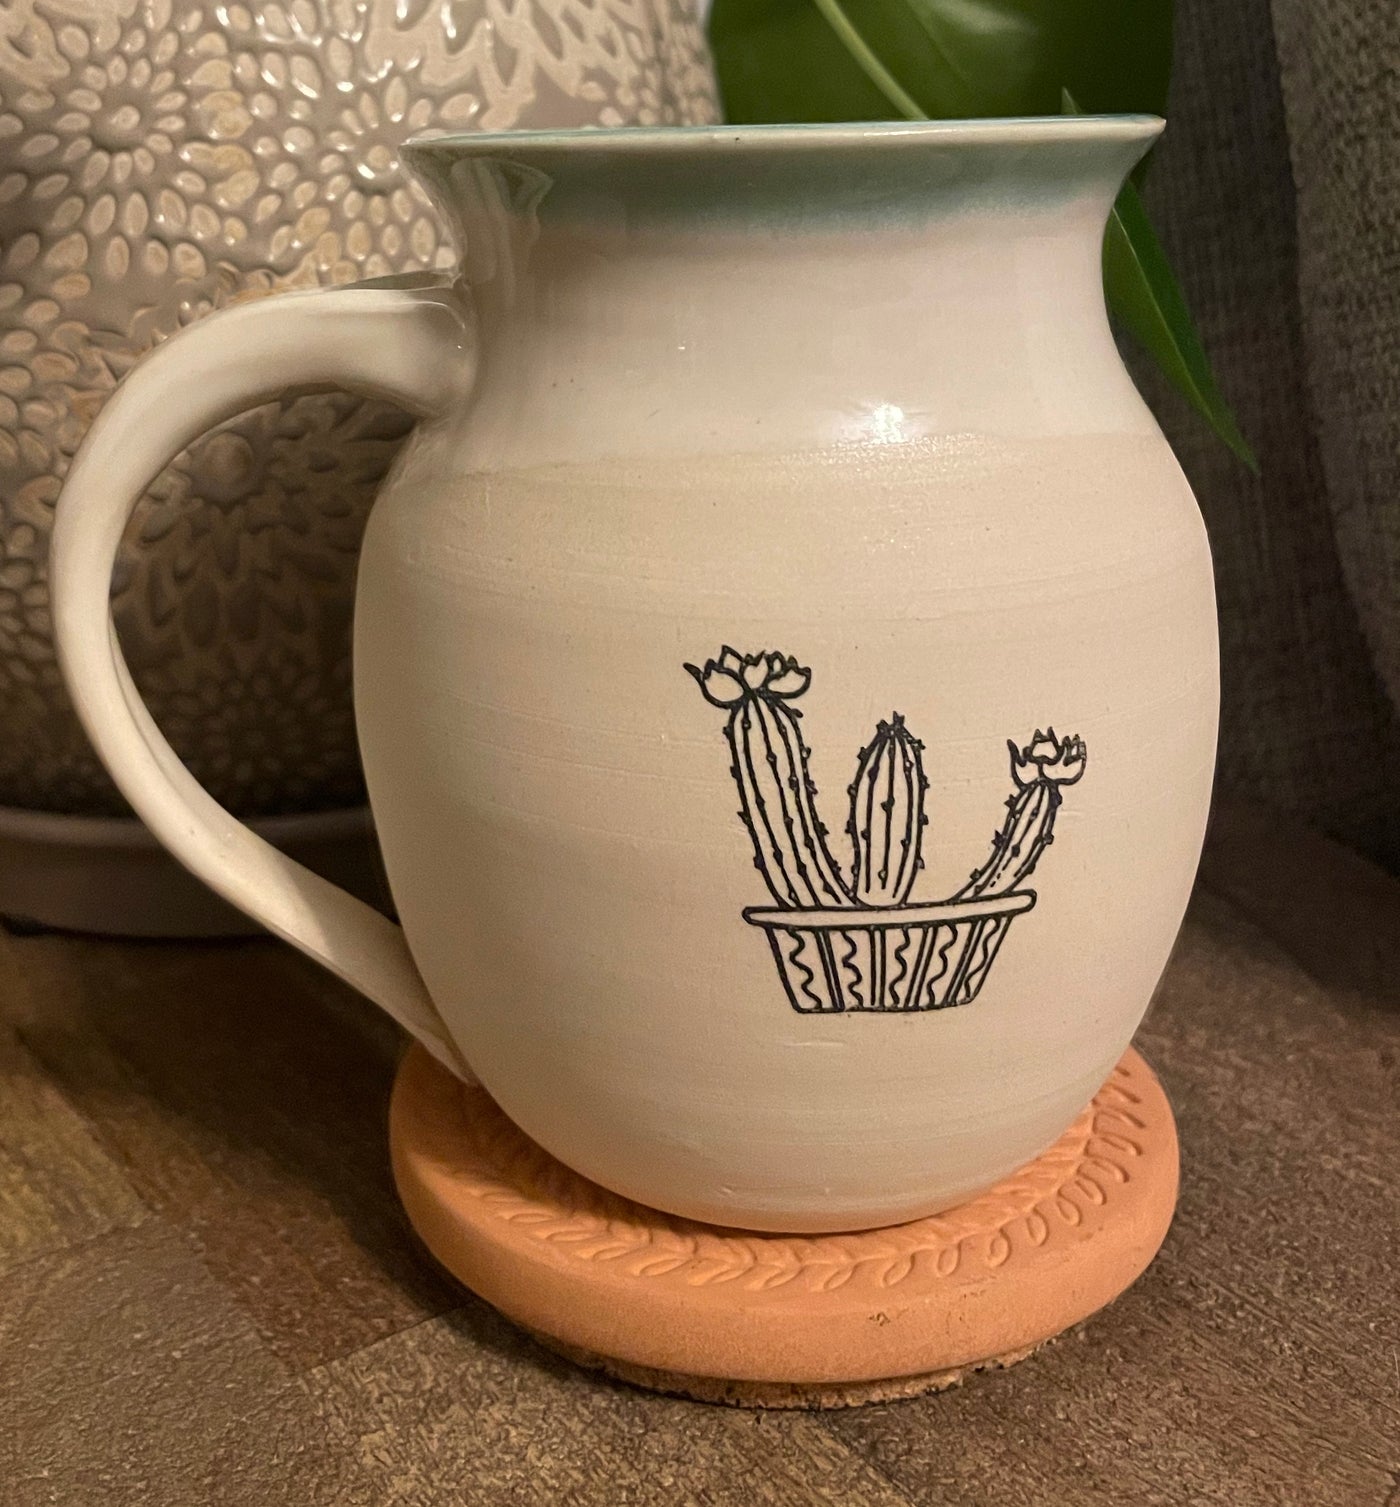 G2 These small batch, handmade mugs are available in blue or green. Each mug is stamped with a unique plant design. Explore the best and coolest gift ideas for plant enthusiasts!